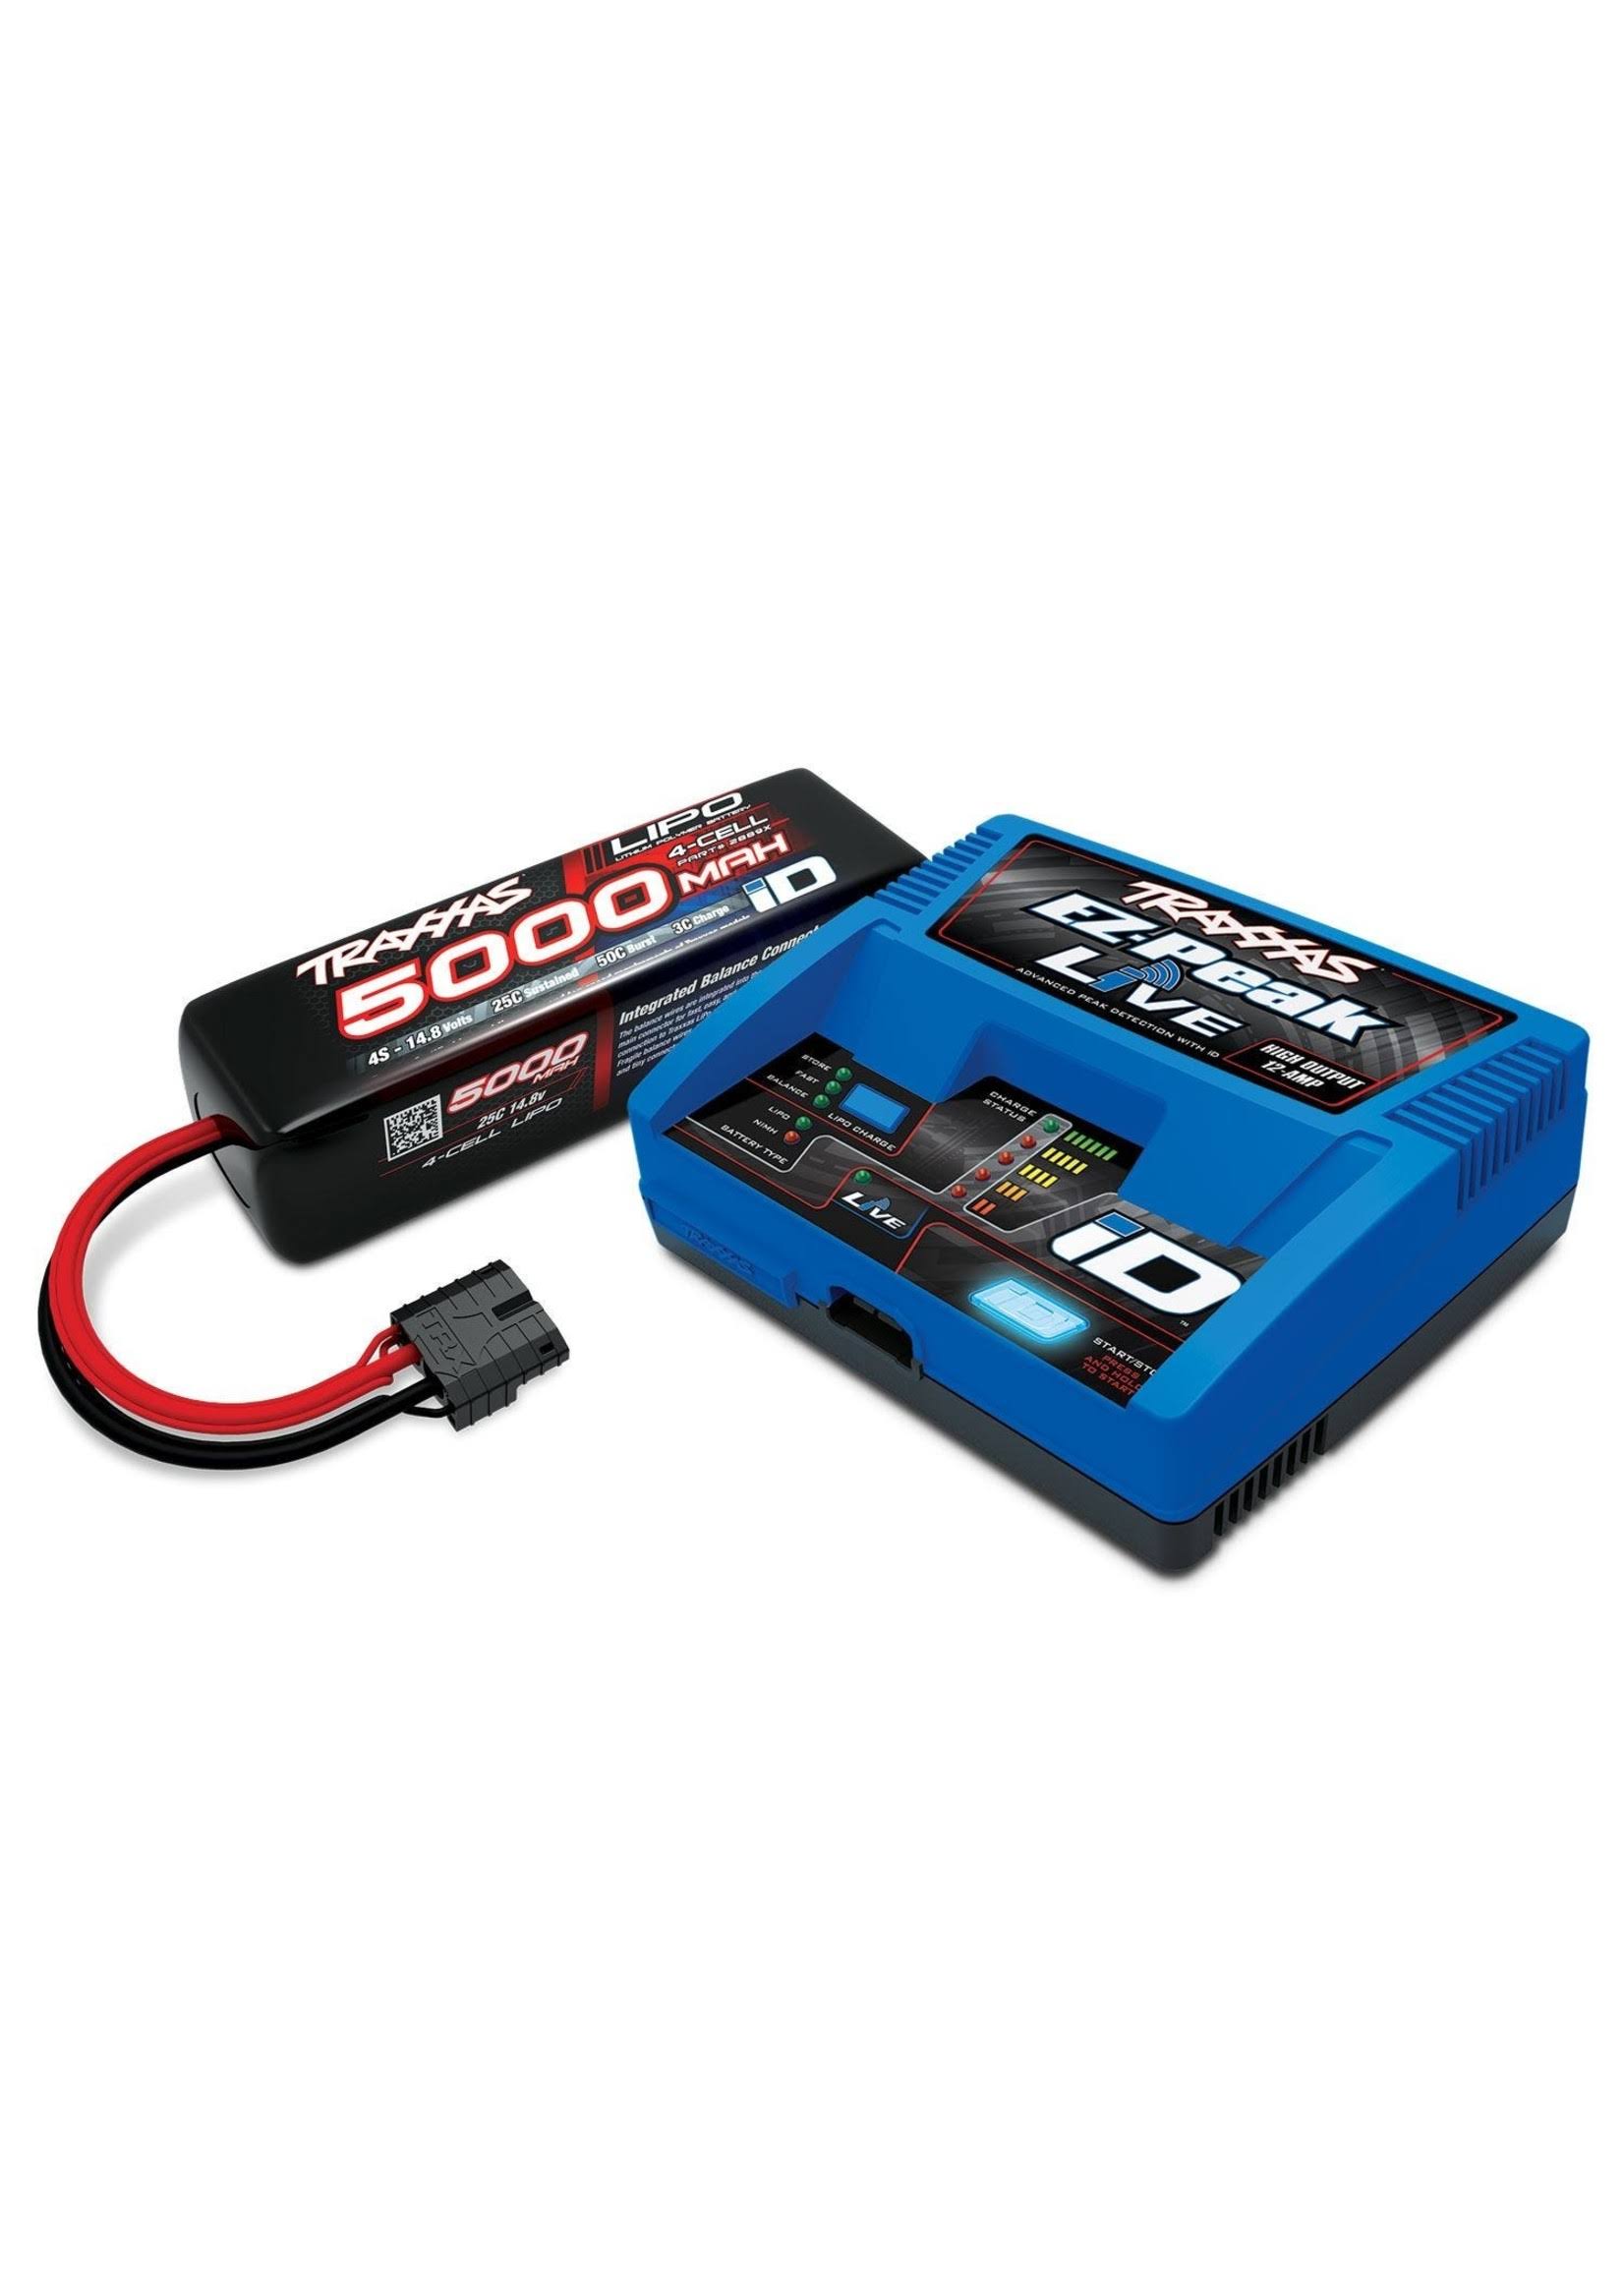 Traxxas 2996X - Power Cell 4S 14.8V Lipo Battery / ID Charger Completer Pack